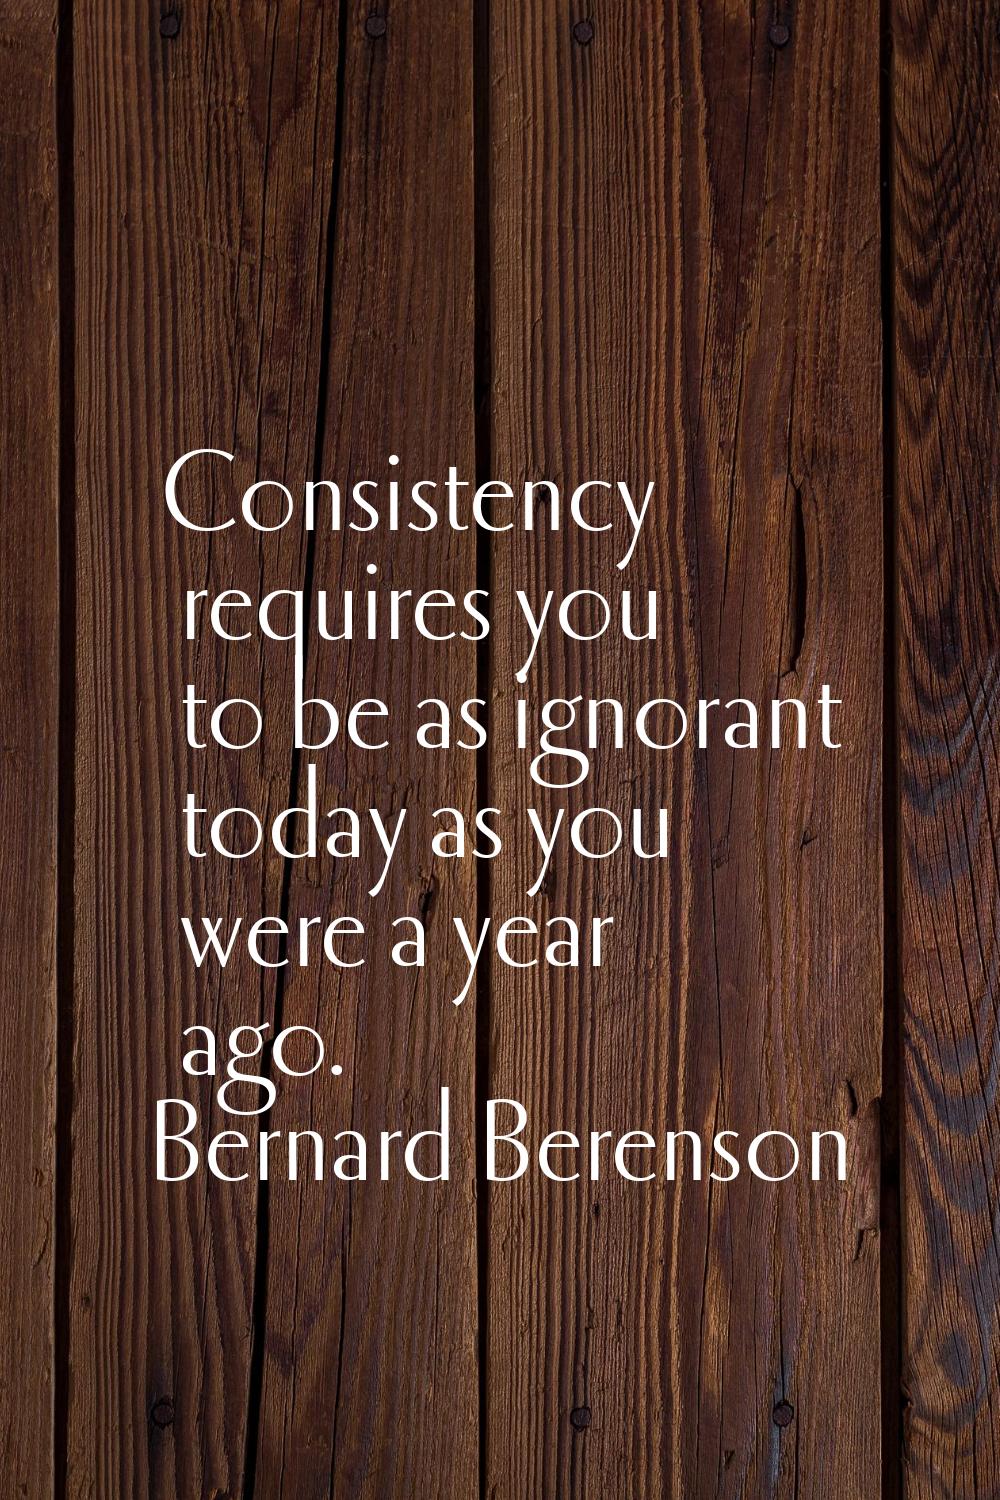 Consistency requires you to be as ignorant today as you were a year ago.